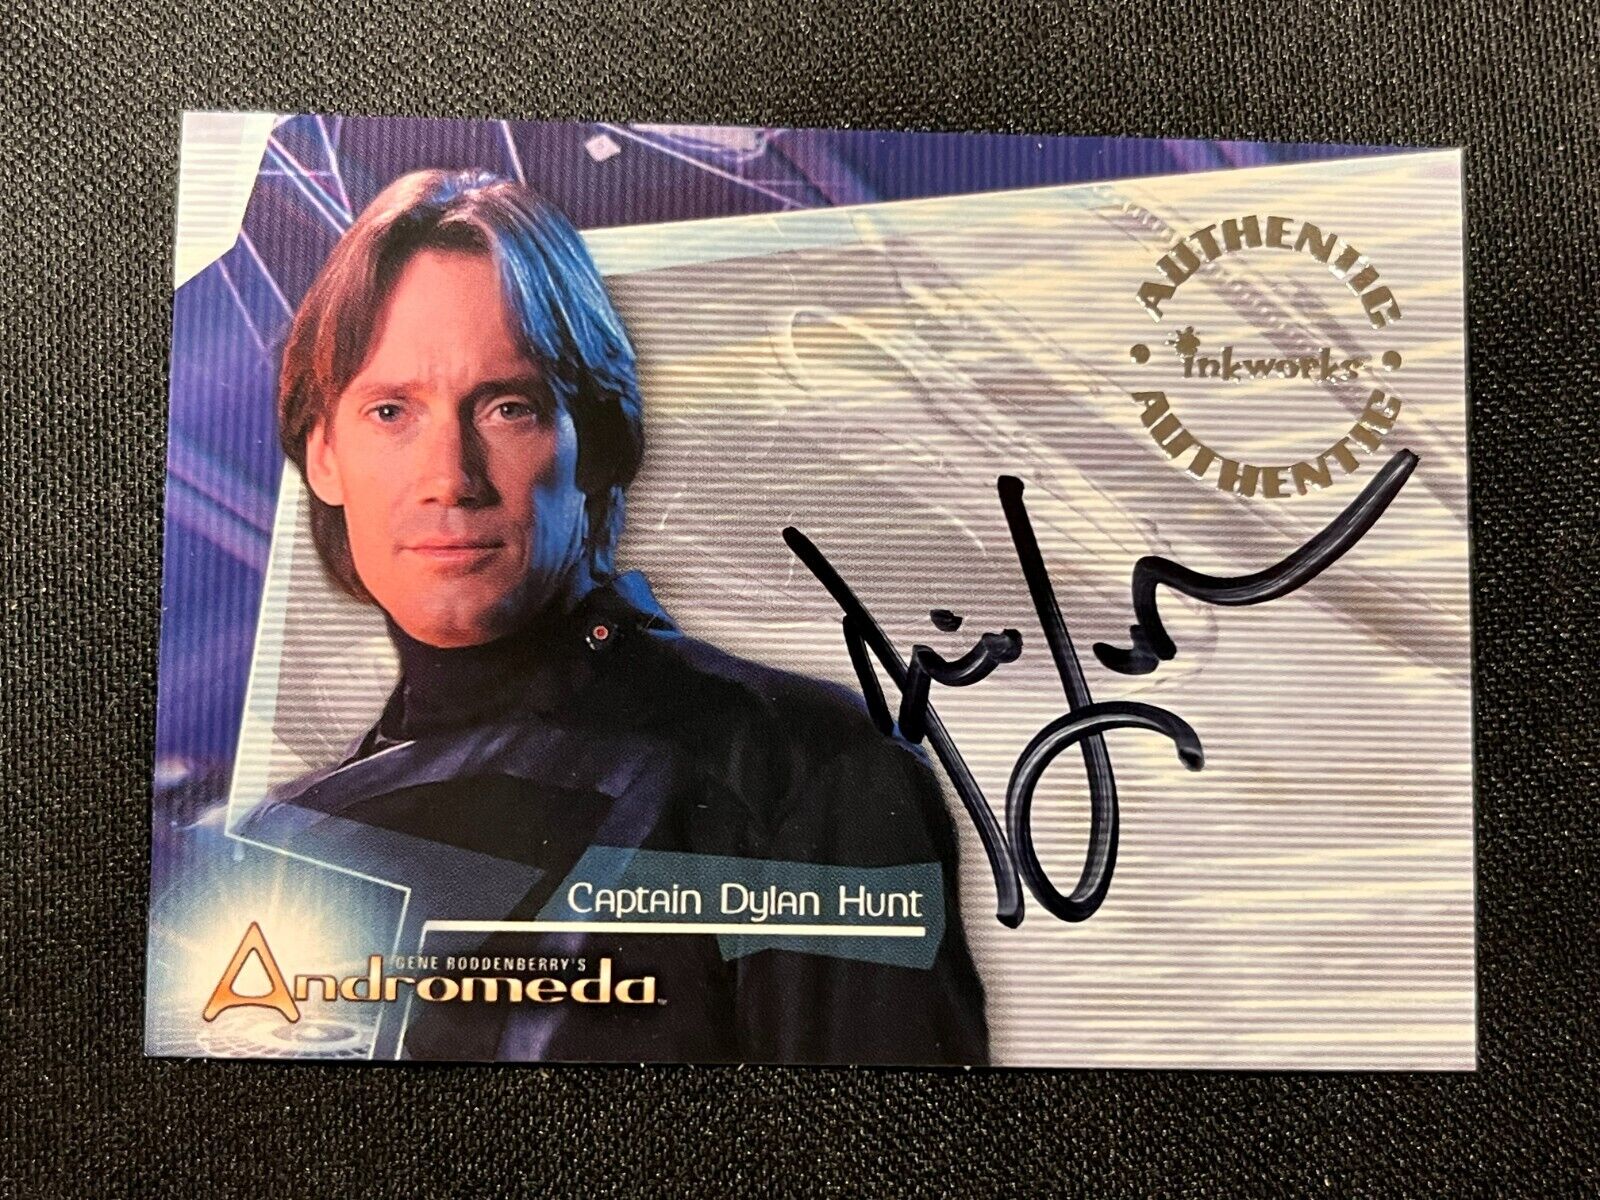 2001 Inkworks Andromeda Captain Dylan Hunt Kevin Sorbo A1 Autograph Card AA